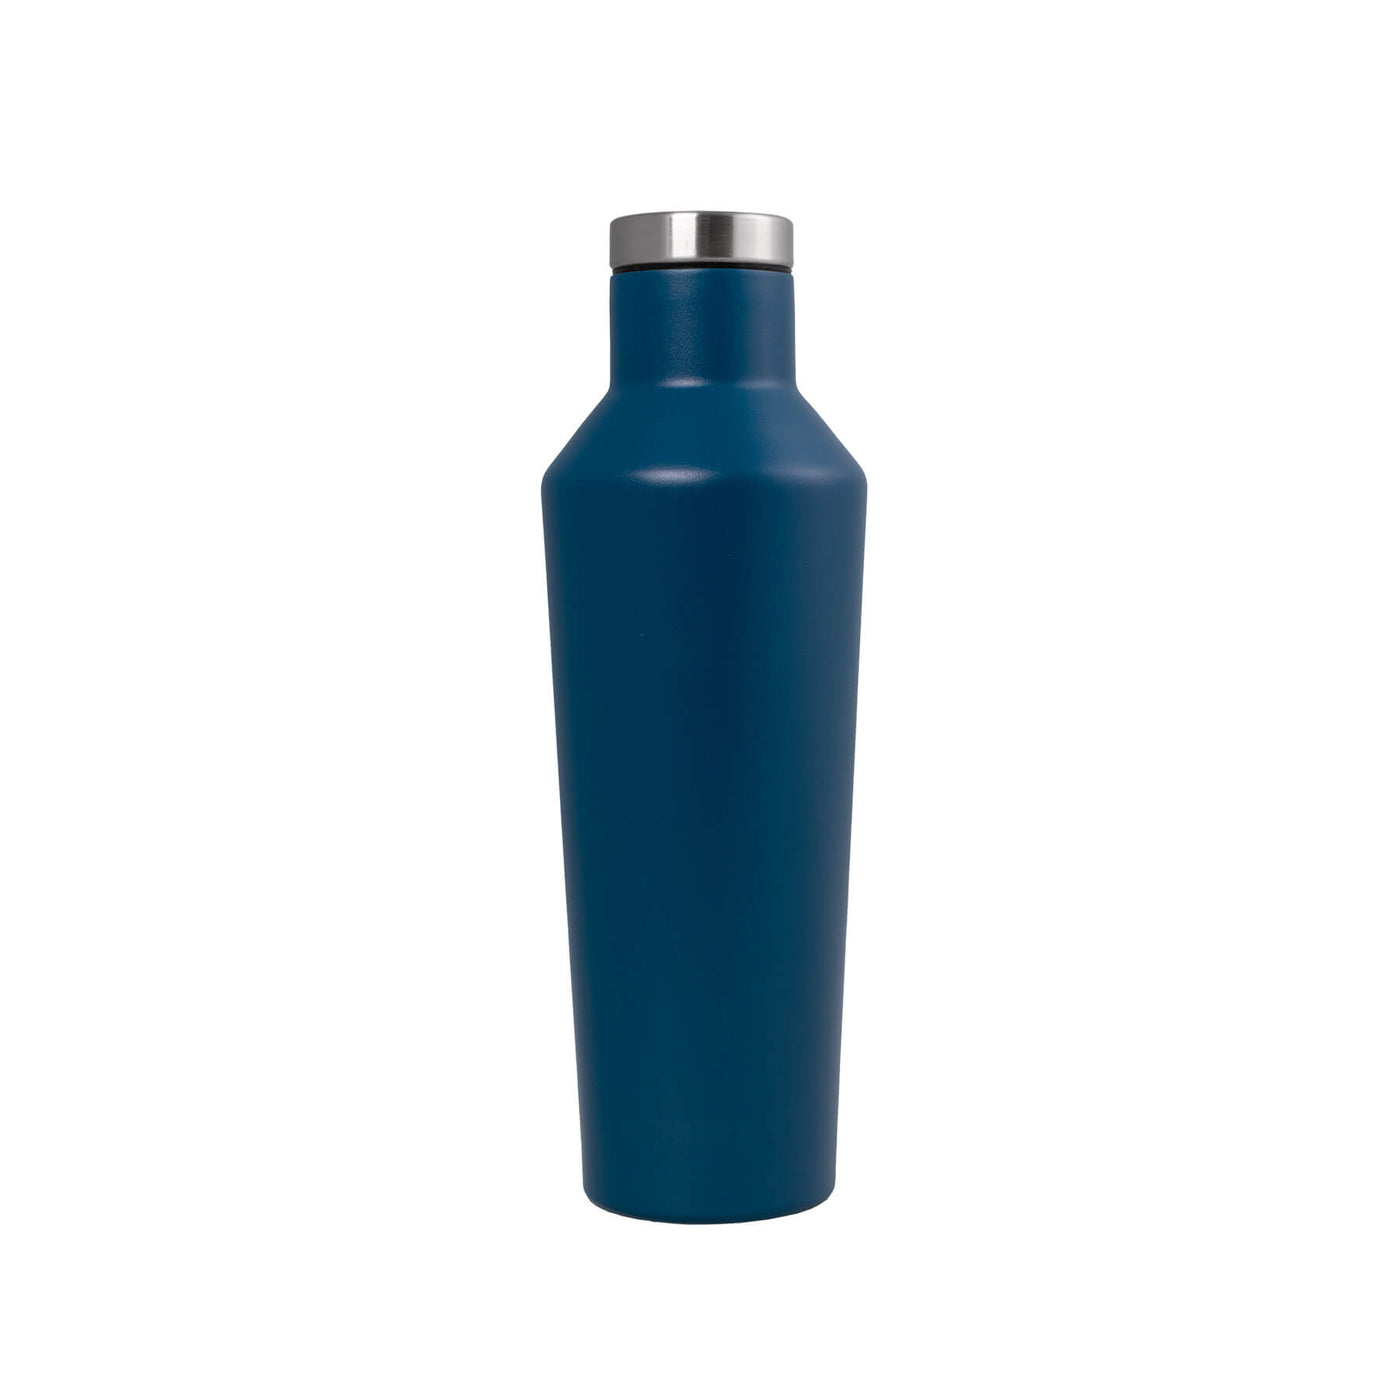 Corkcicle Canteen Cap with Straw, for 20 oz and 40 oz Canteens